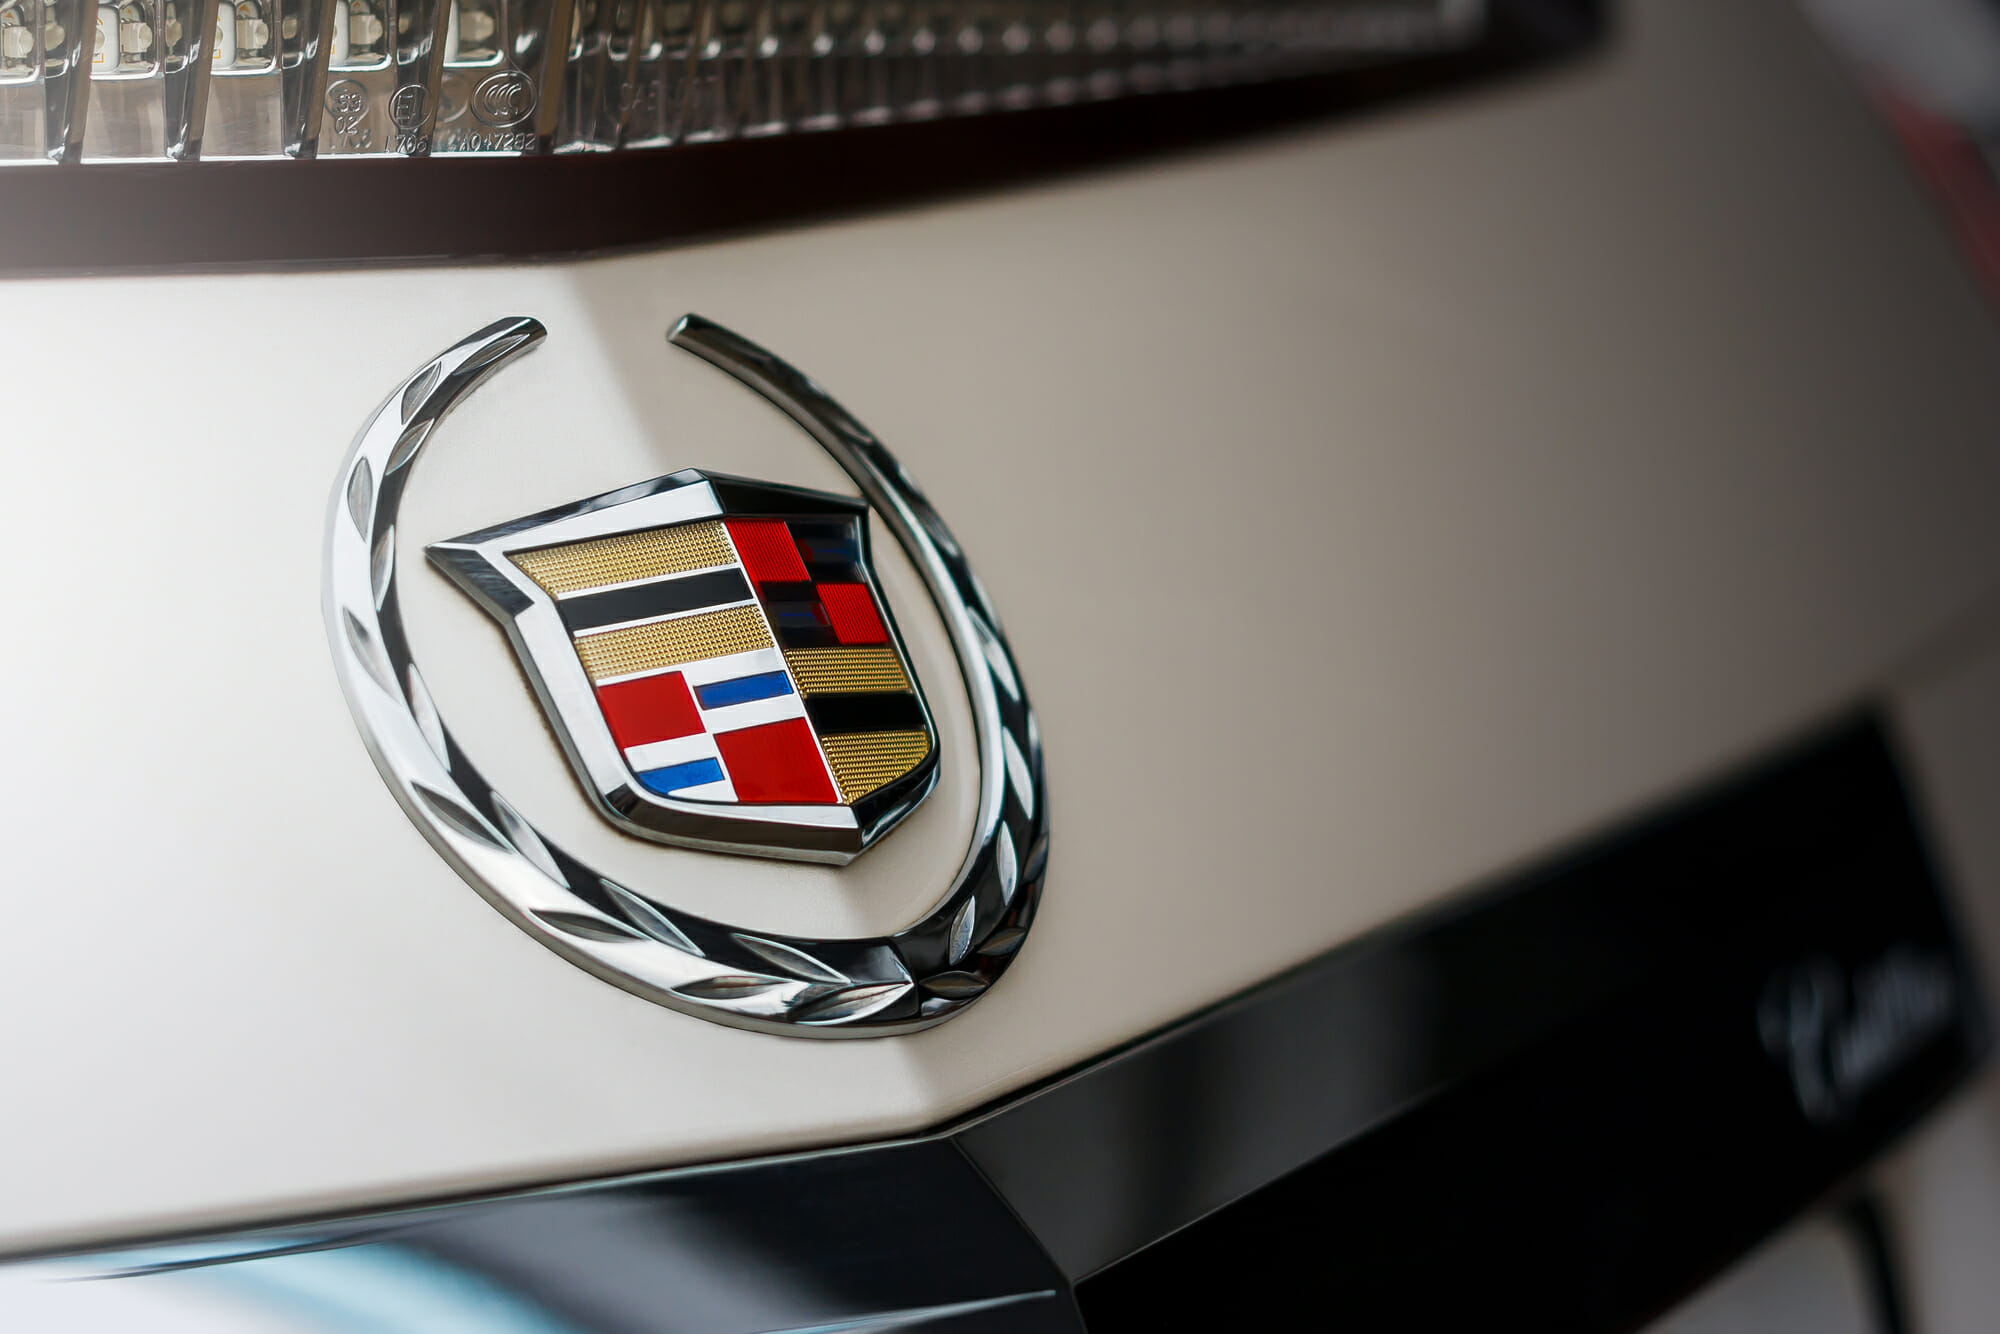 Cadillac Reliability: How Long Will They Last?